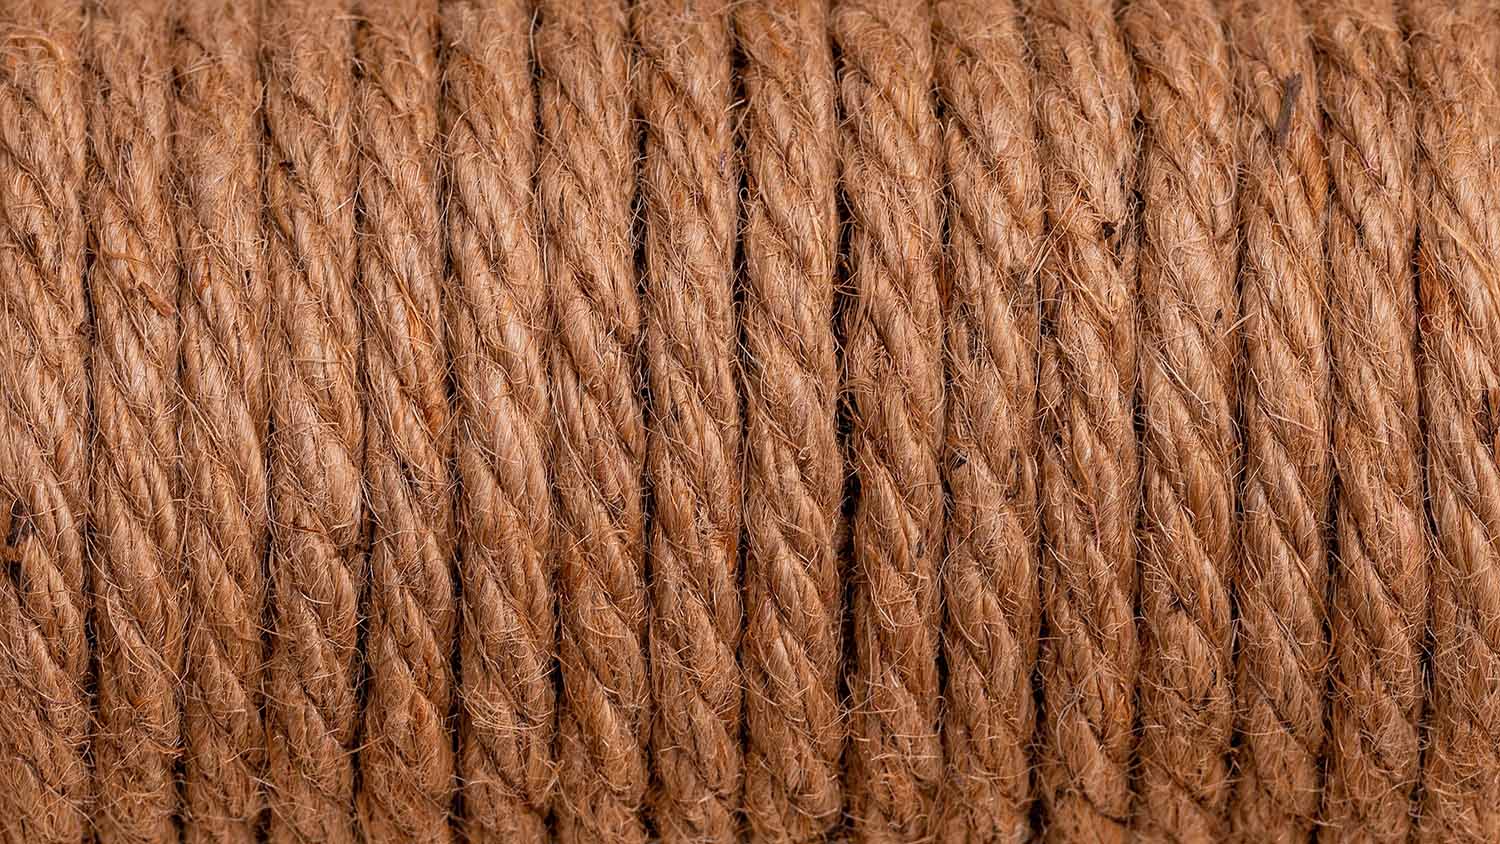 Gently coiled hemp rope. Used as natural cable coating for unique ceiling lamp.